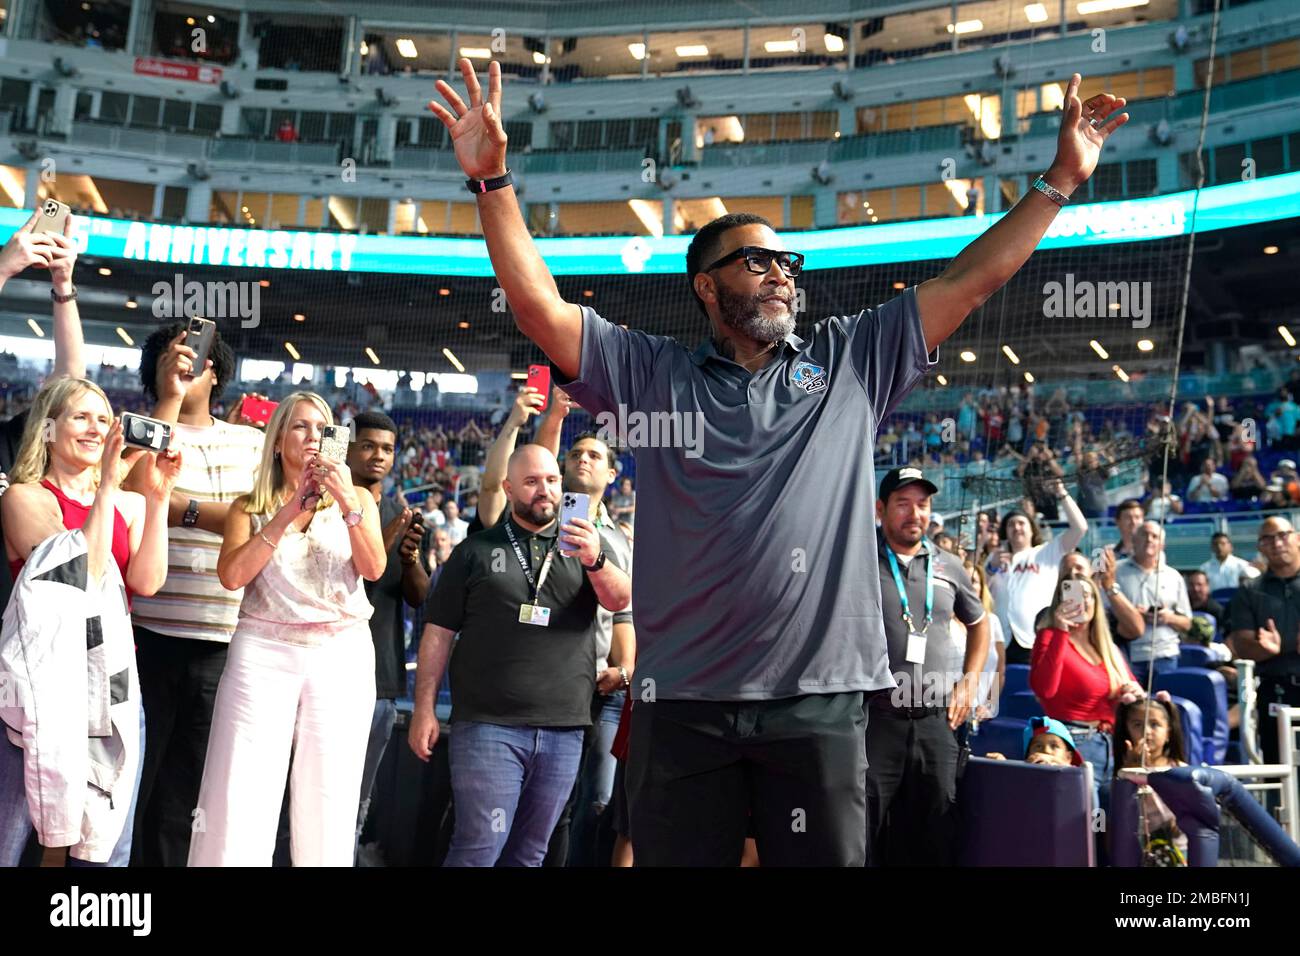 Former Florida Marlins player Gary Sheffield is introduced during